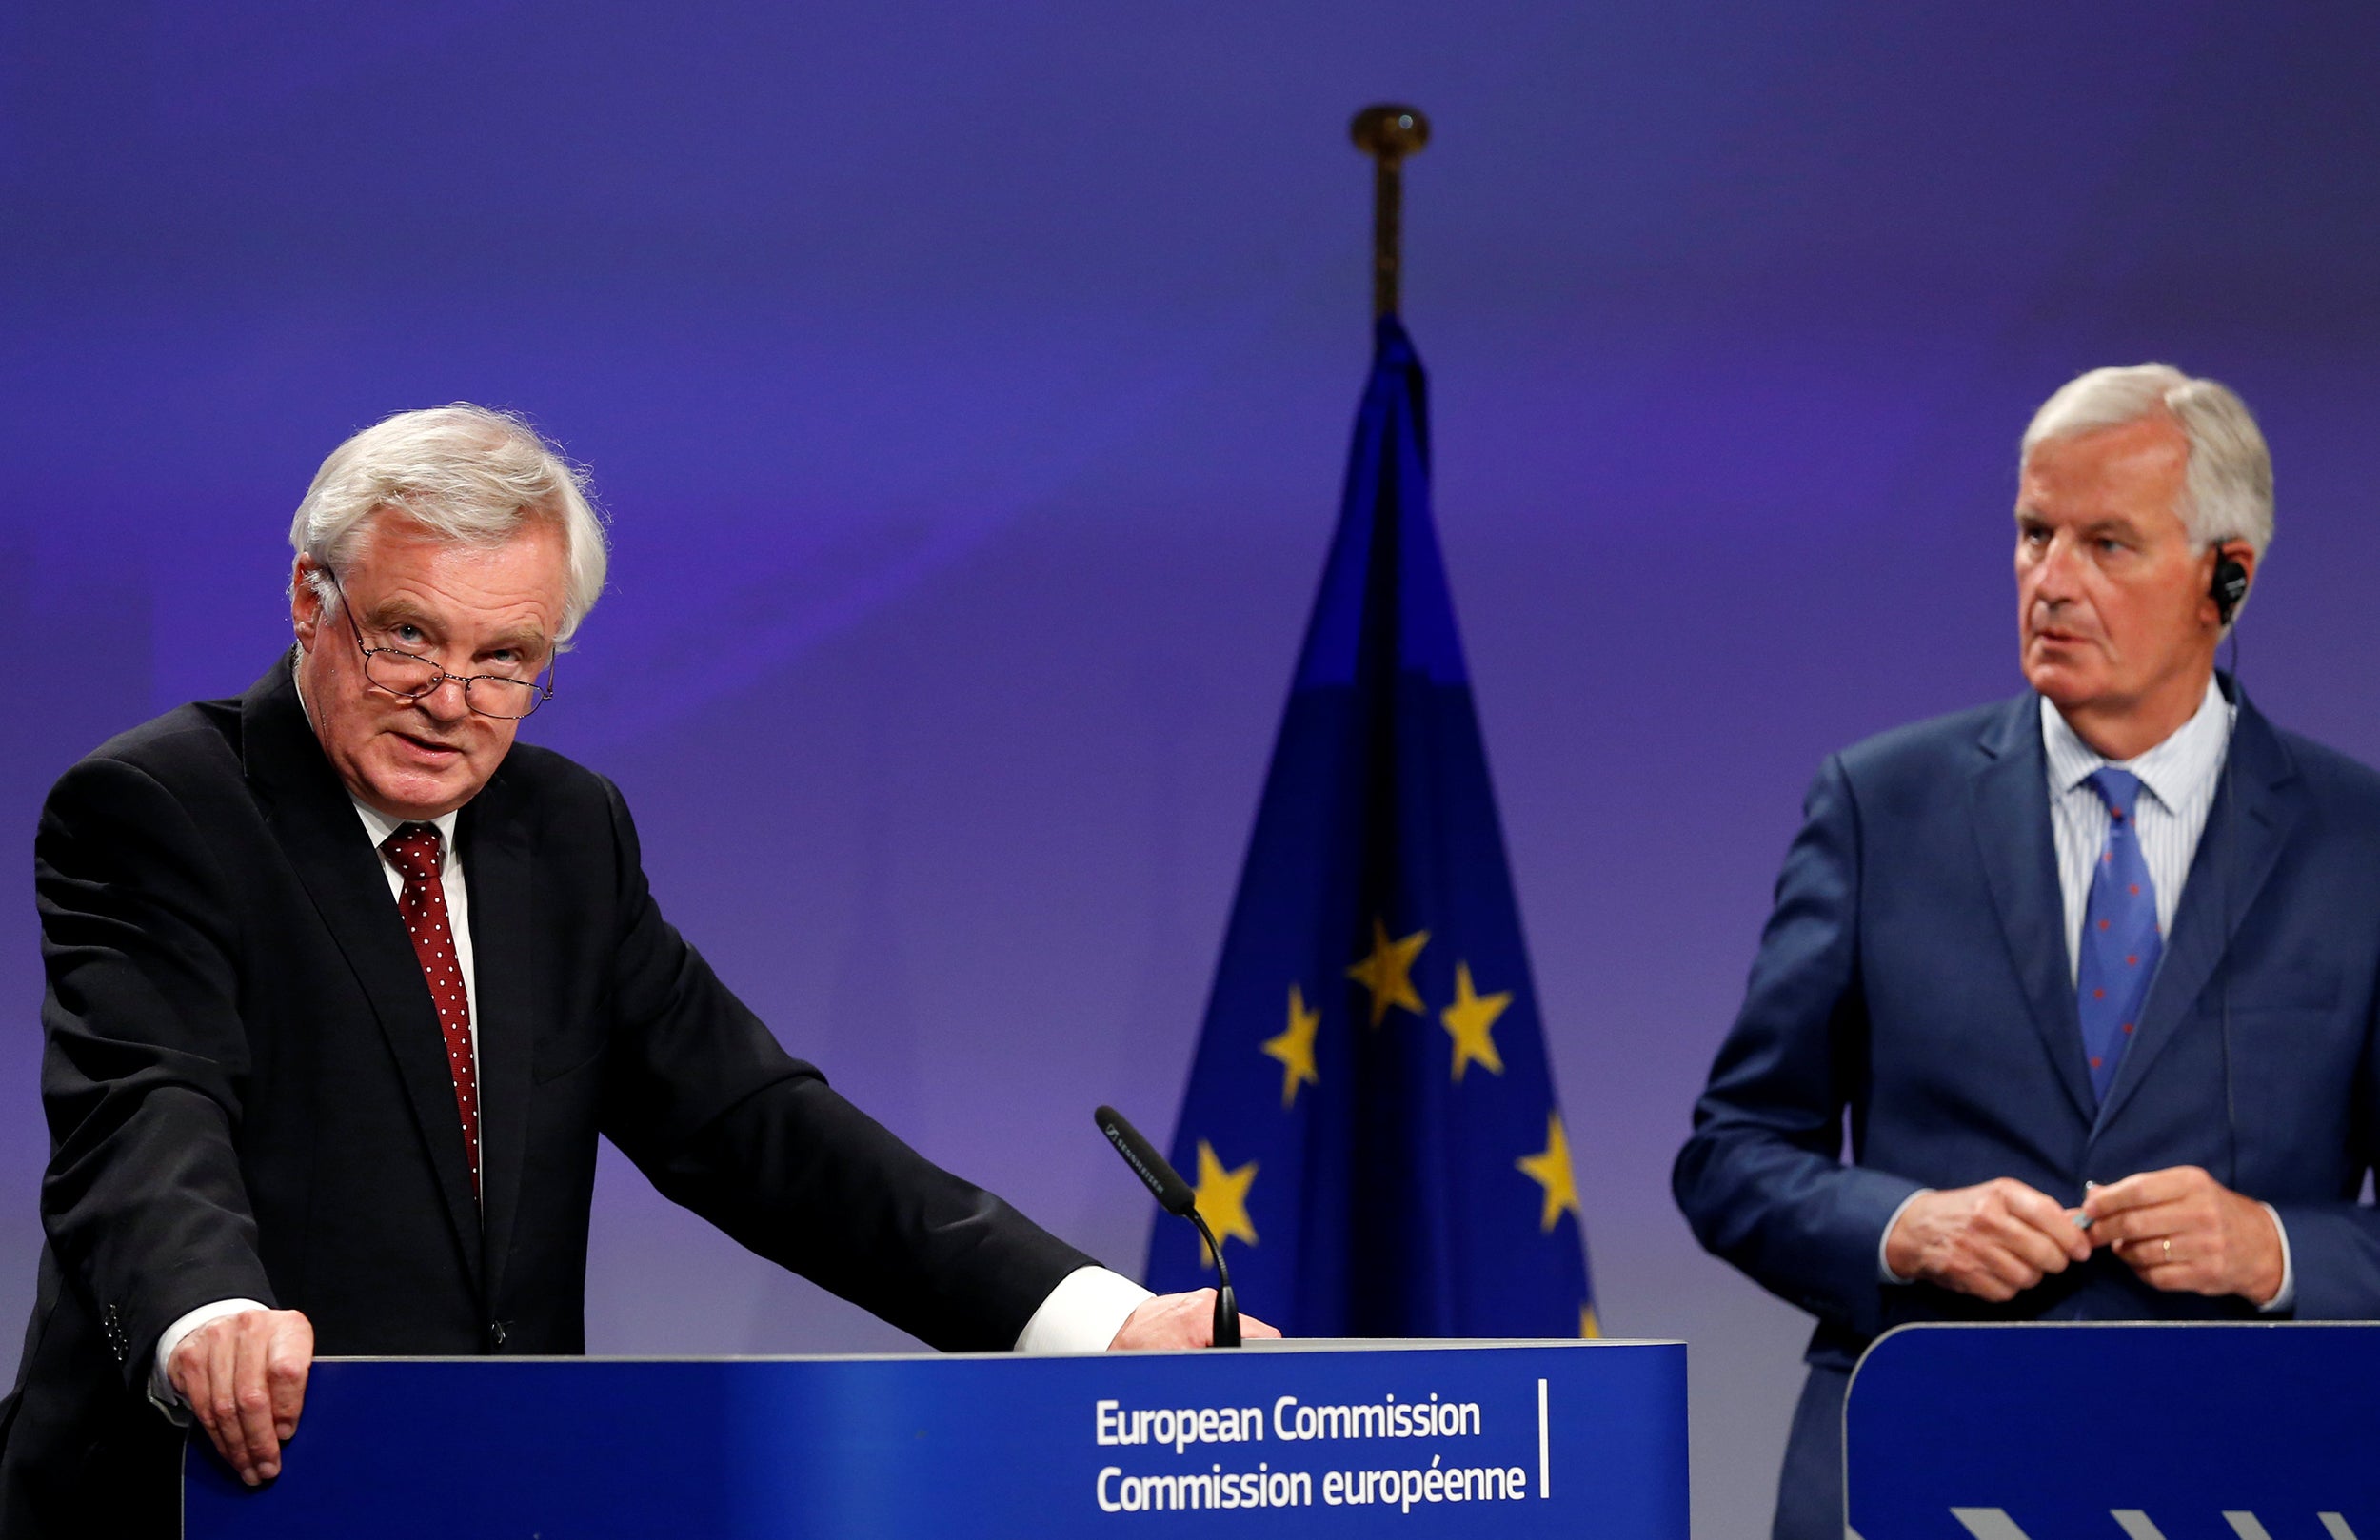 The last round of talks ended with Brussels claiming Britain is ‘backtracking’ on commitments, while the UK argued that the mandate given to the EU’s chief negotiator was preventing progress